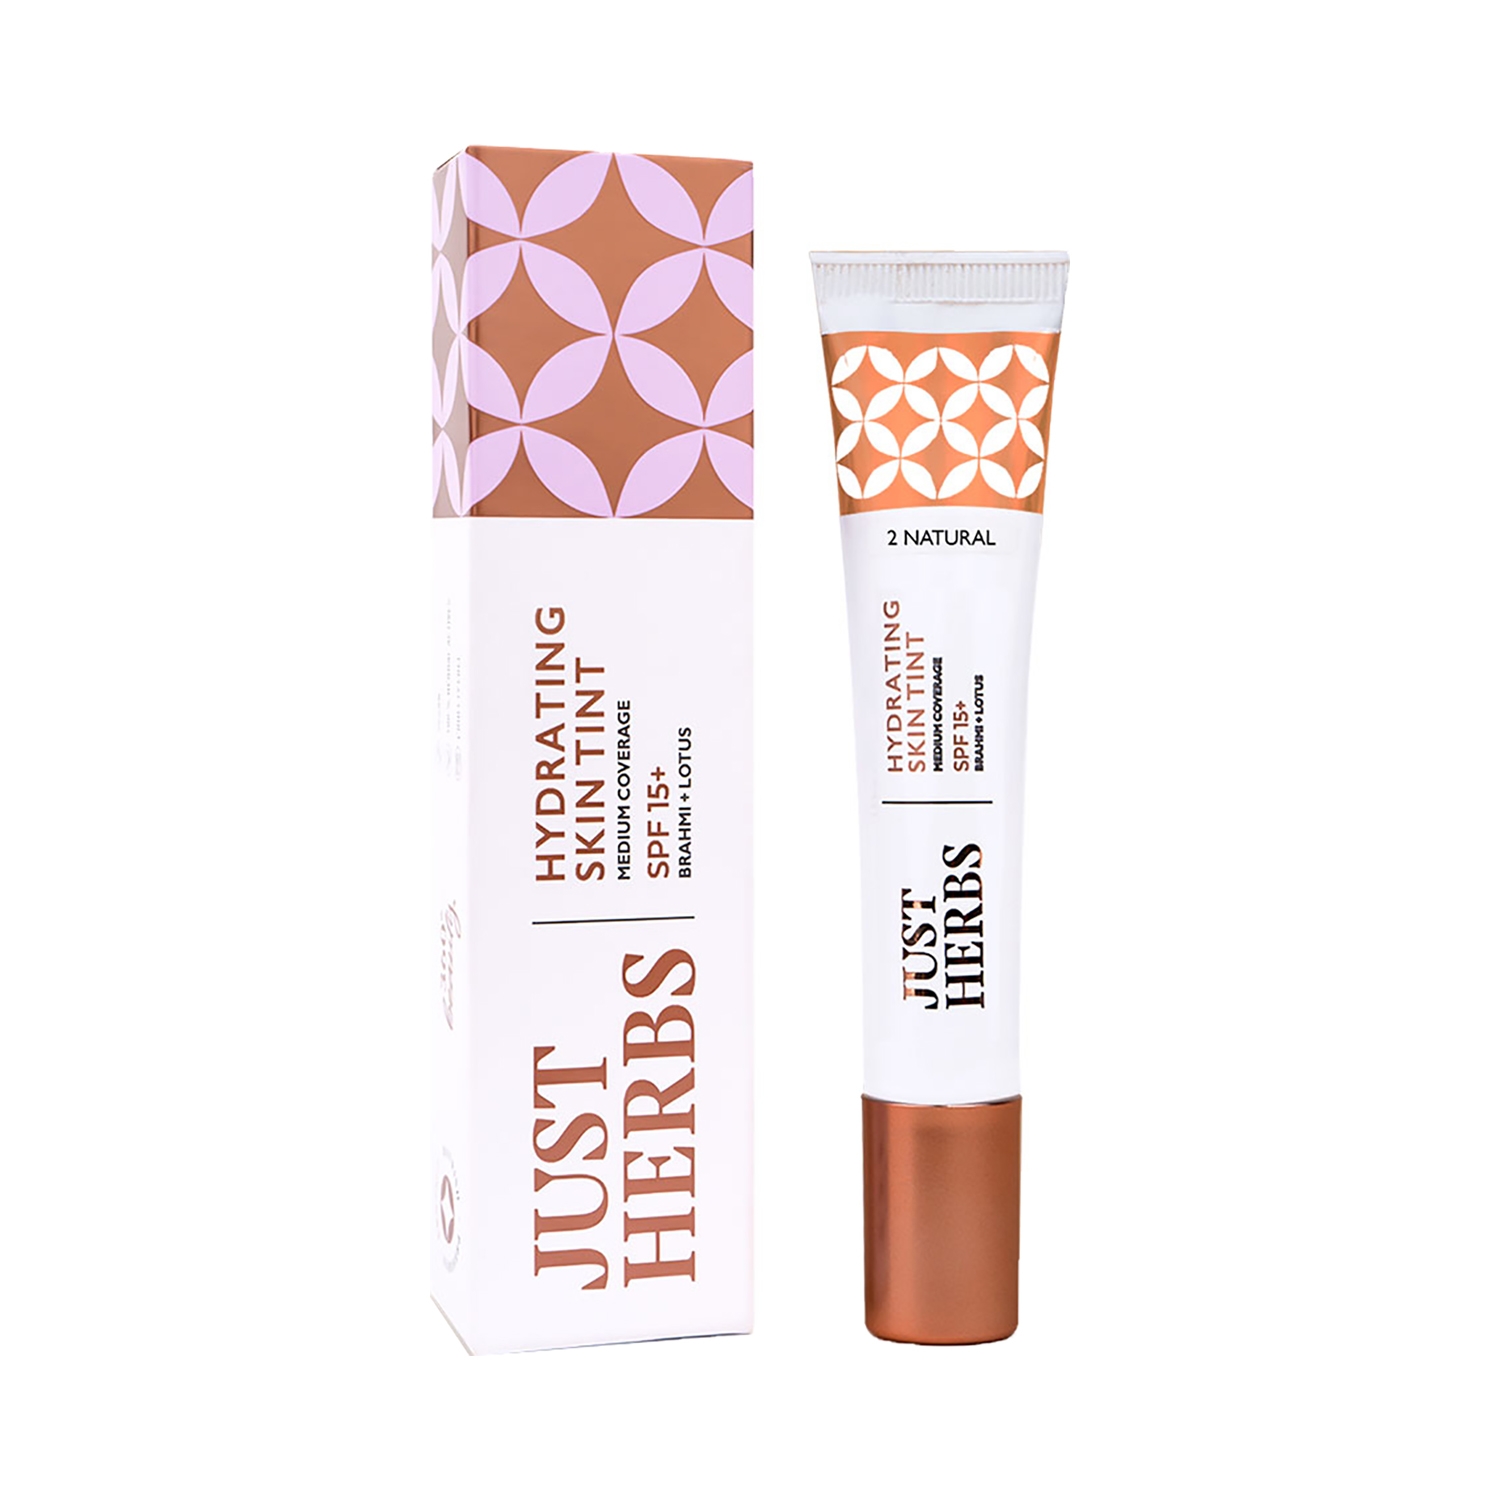 Just Herbs Enriched Hydrating Skin Tint SPF 15+ - 02 Natural (20g)